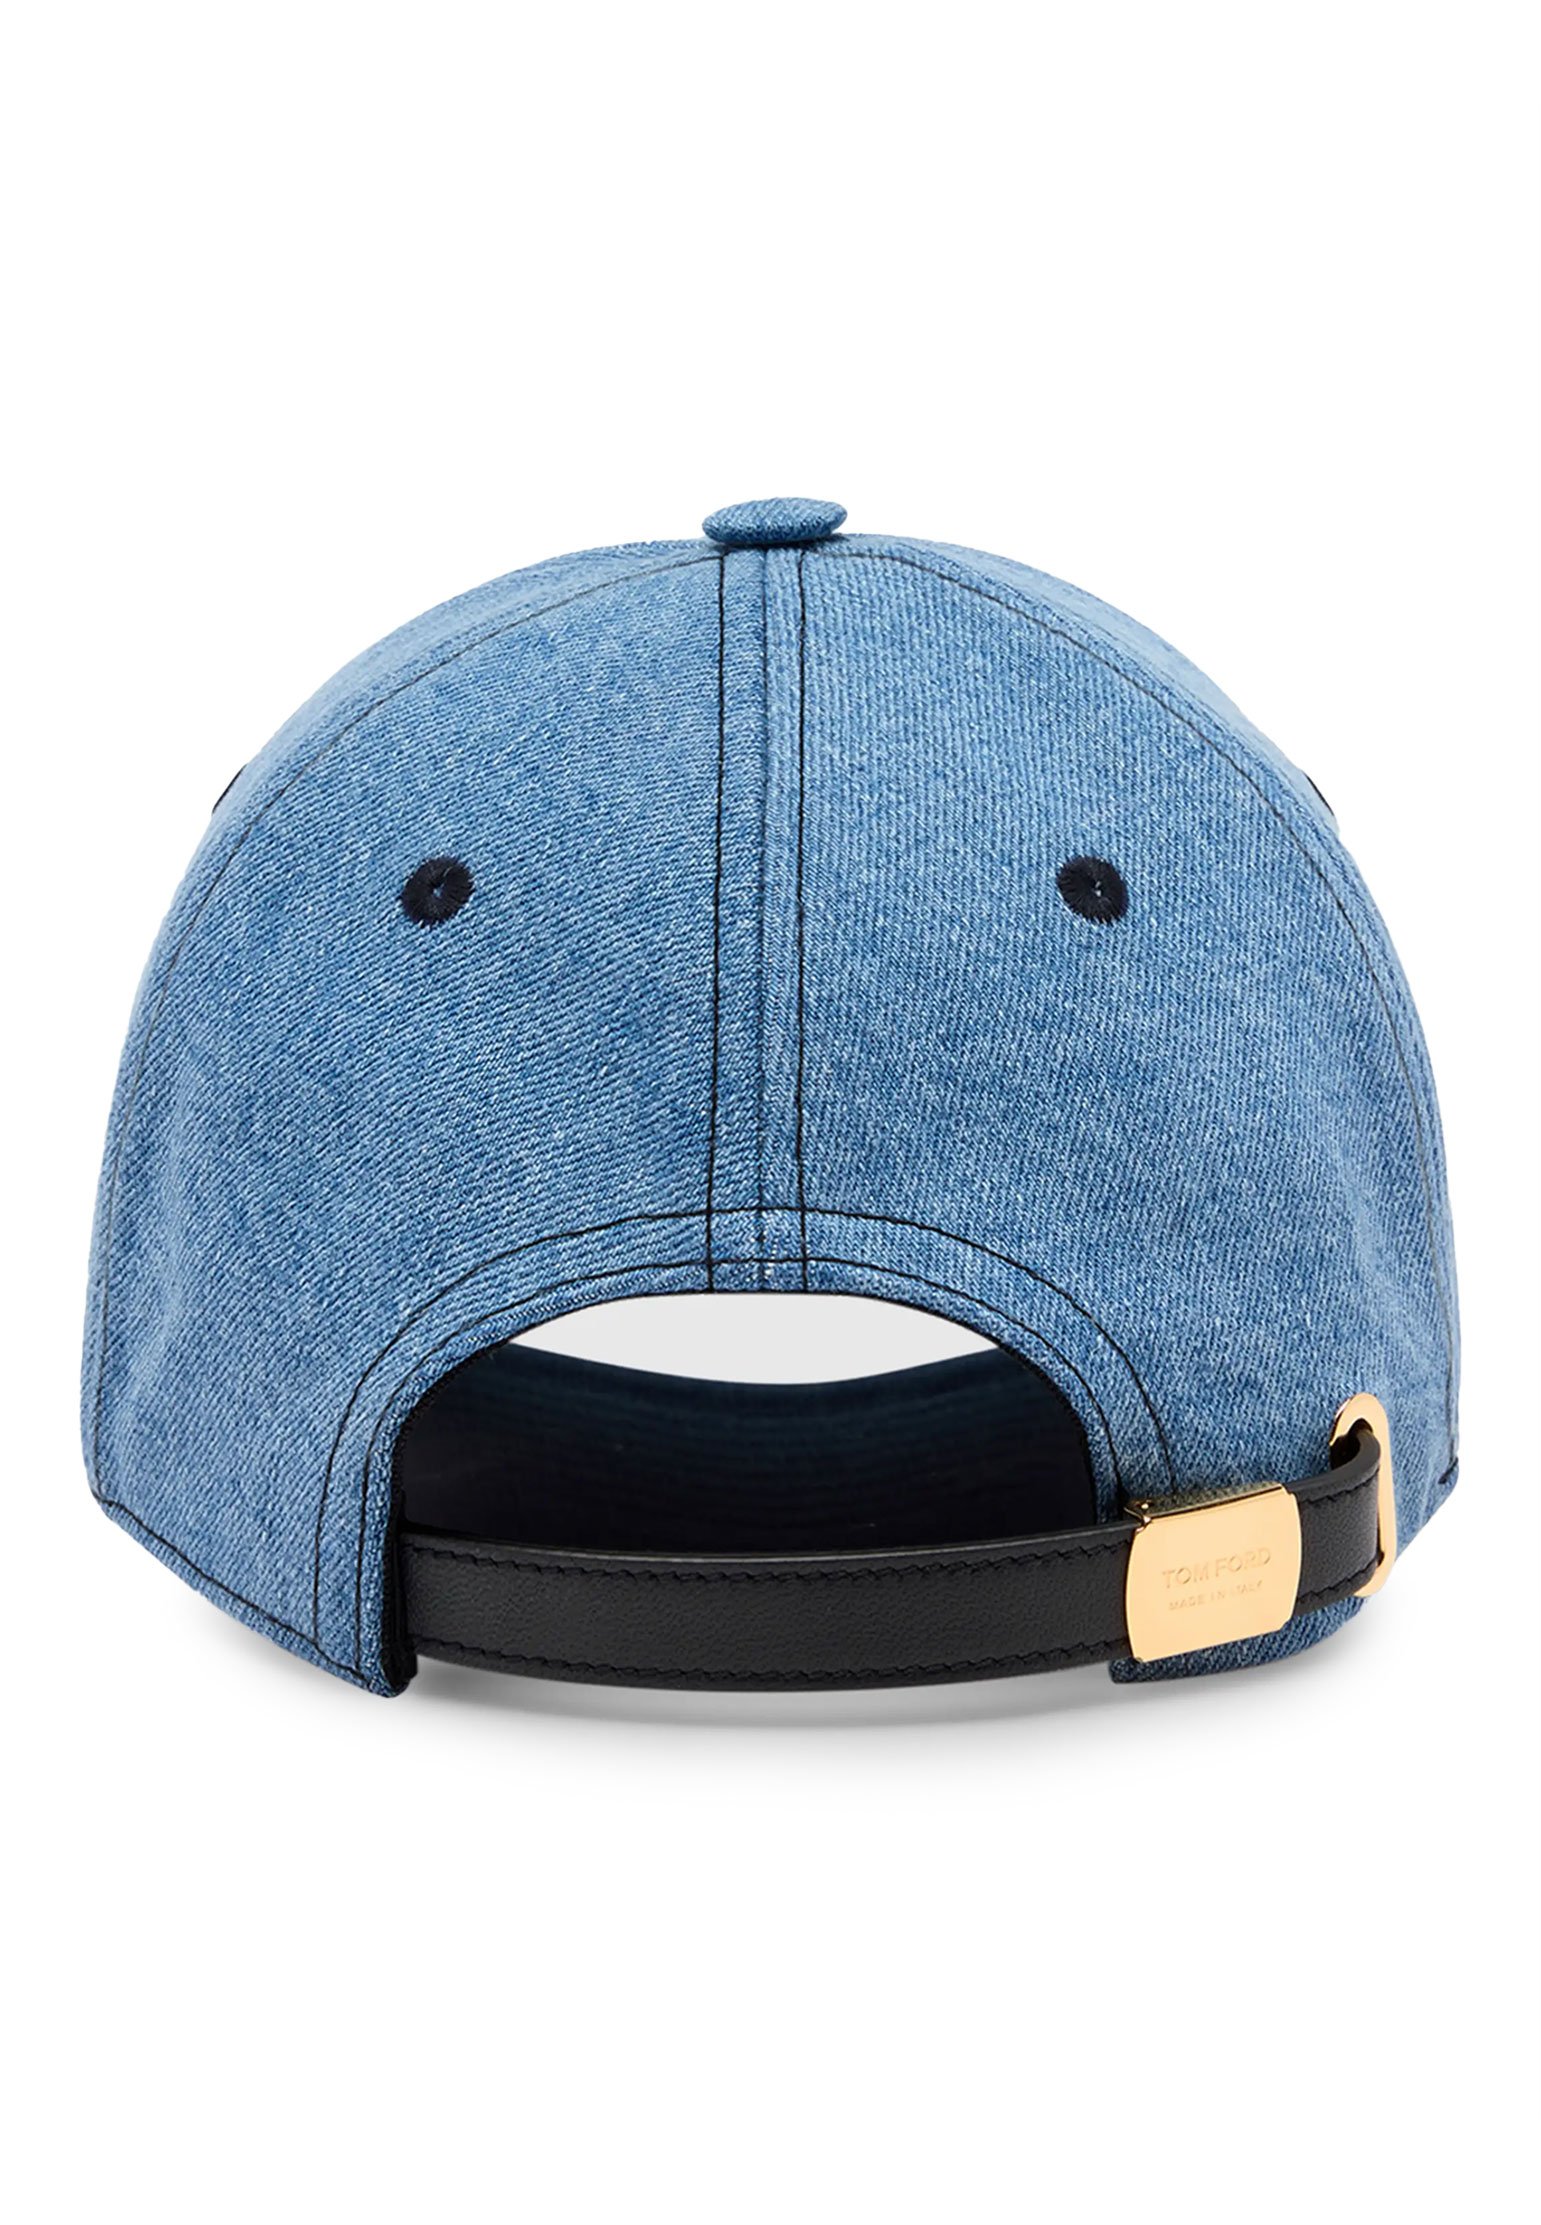 Cap TOM FORD Color: blue (Code: 2993) in online store Allure